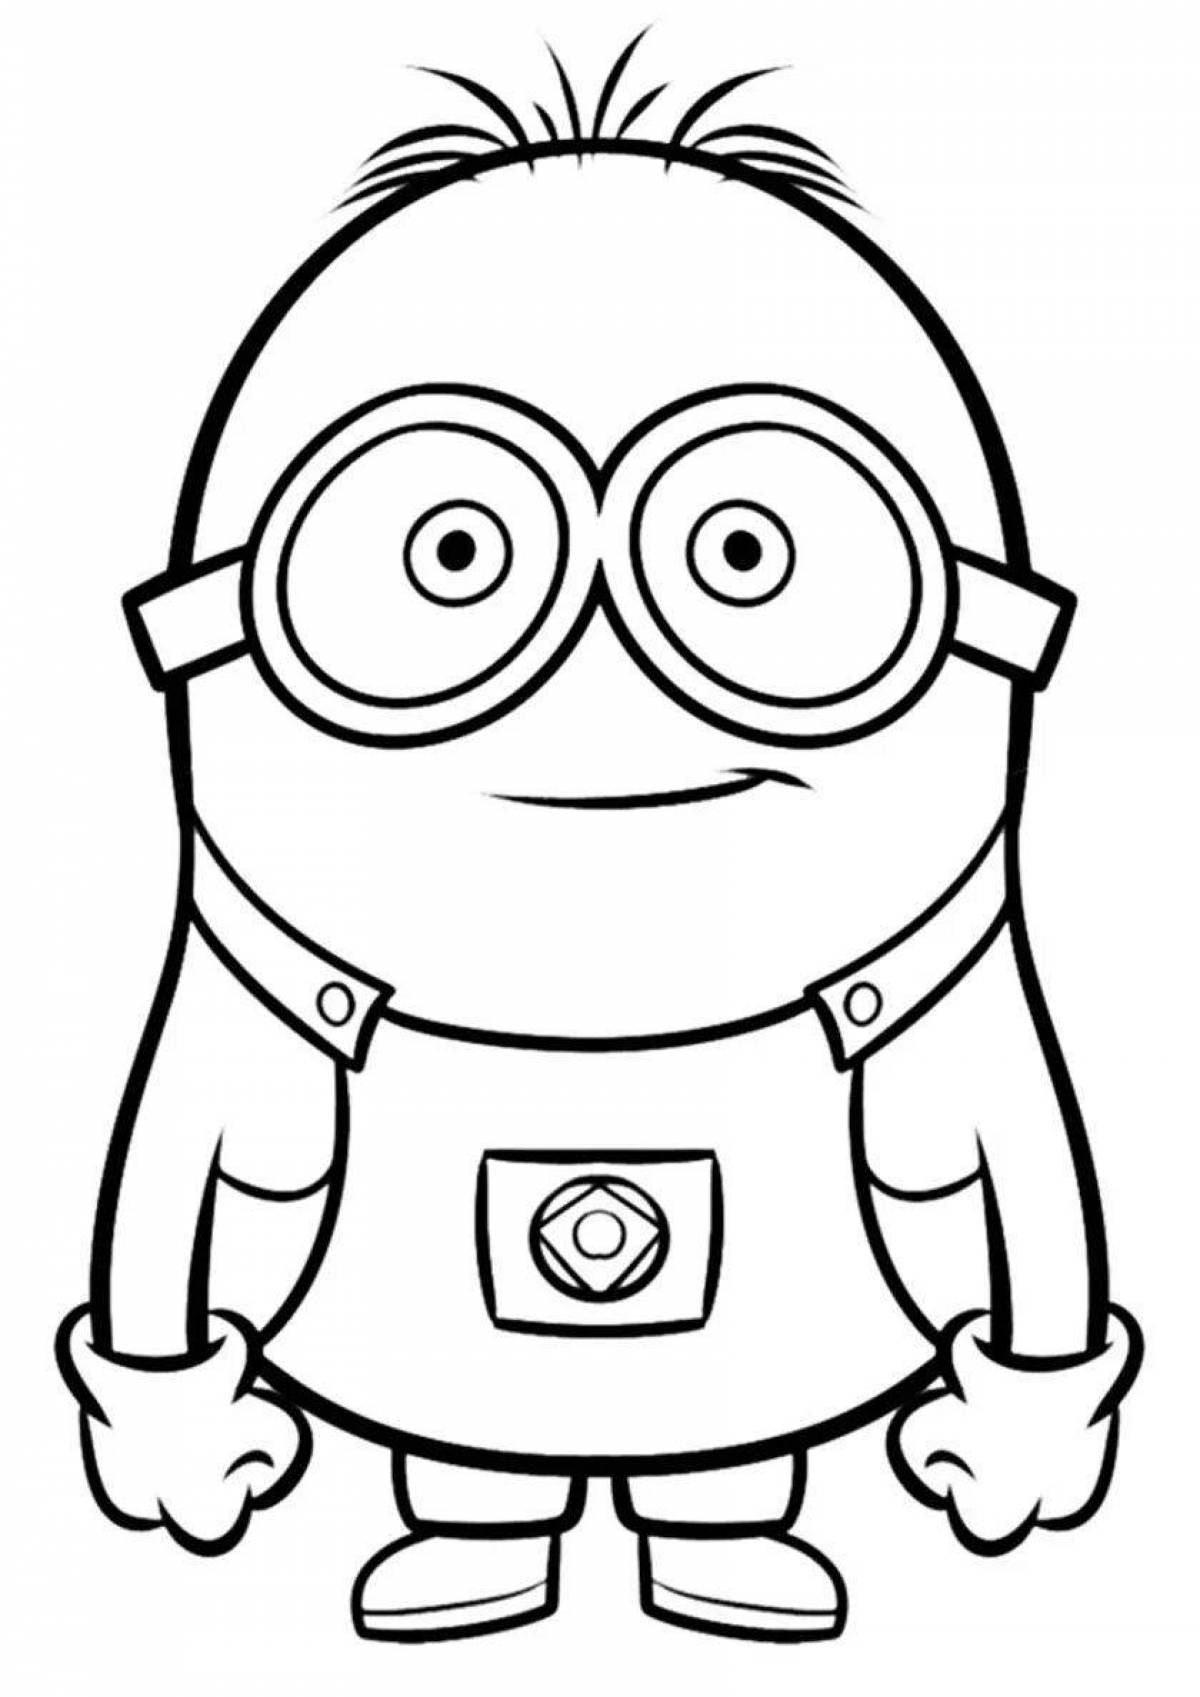 Outstanding minion coloring book for kids